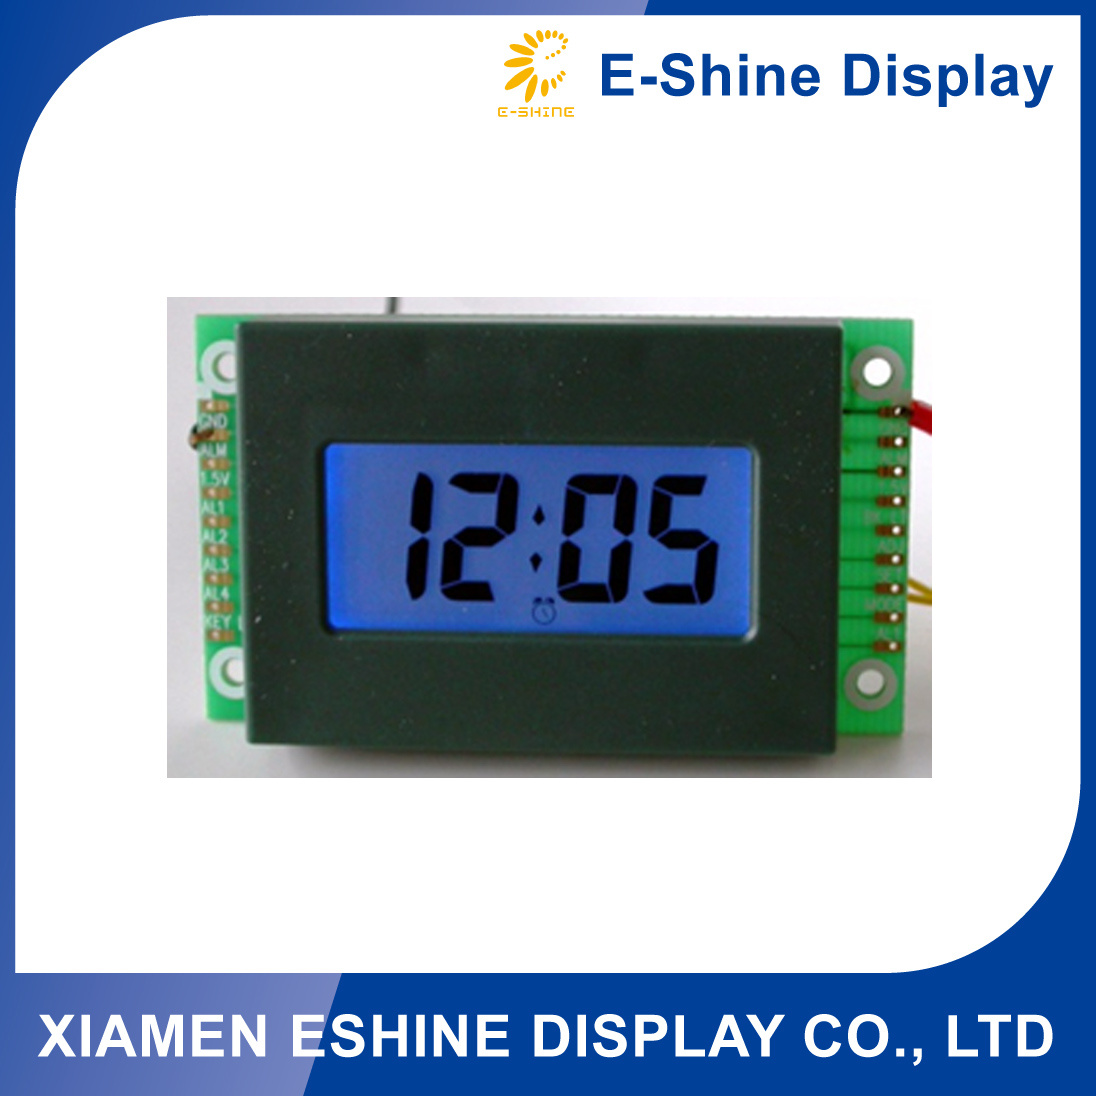 2.0 Inch Customized LCD Display with Blue Backlight